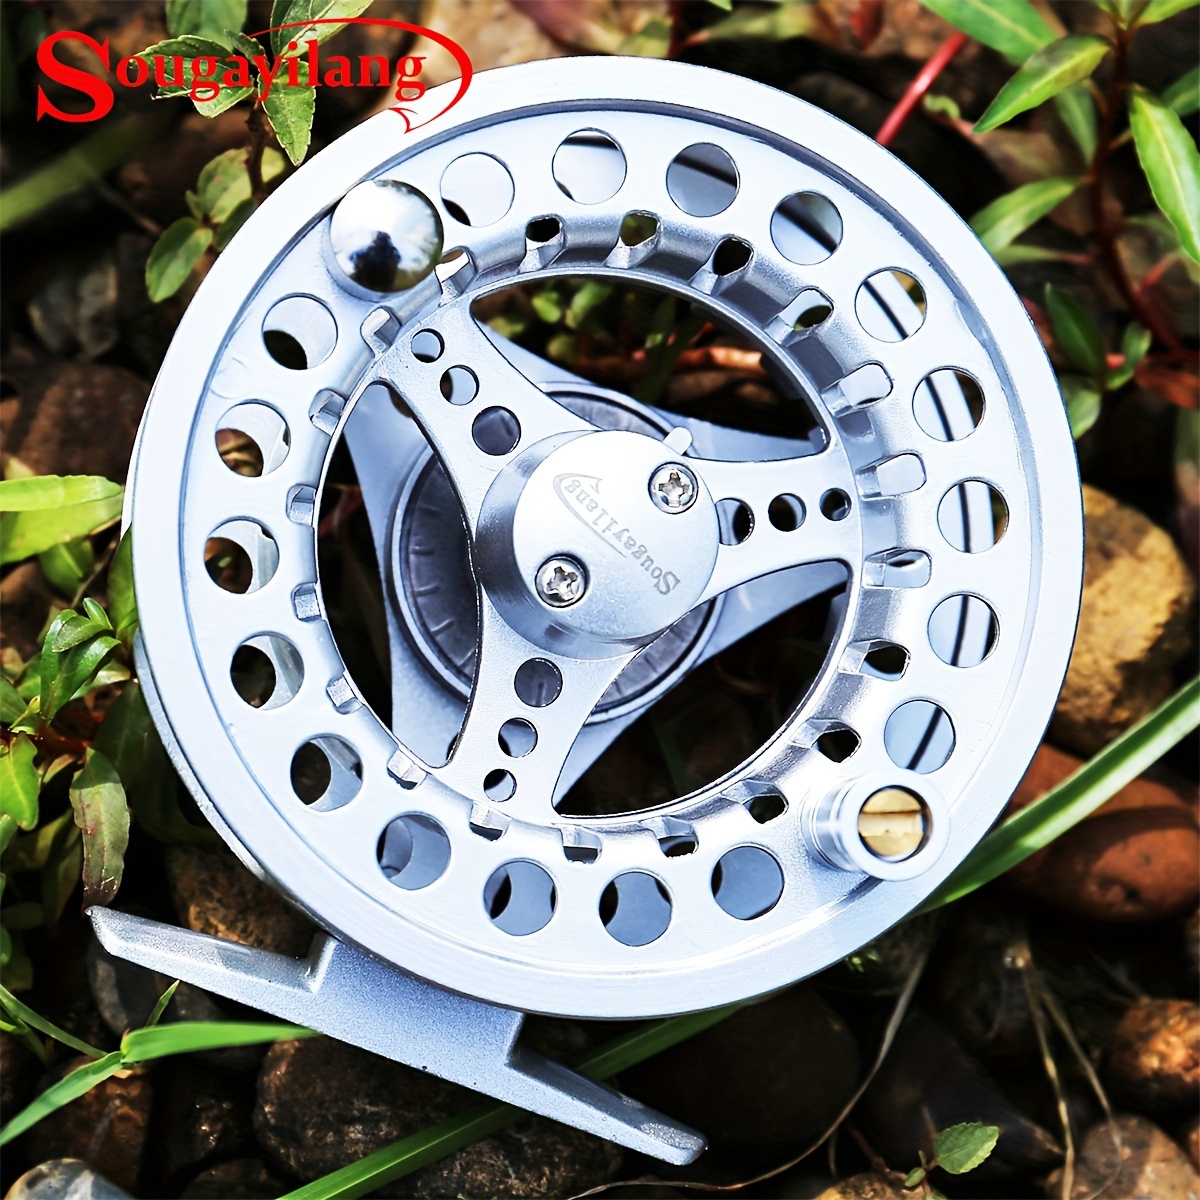 Sougayilang 1pc Silvery Fishing Reel, 5/6wt Large Arbor Fly Reel, Stainless  Steel Drag System, Fishing Tackle For Freshwater